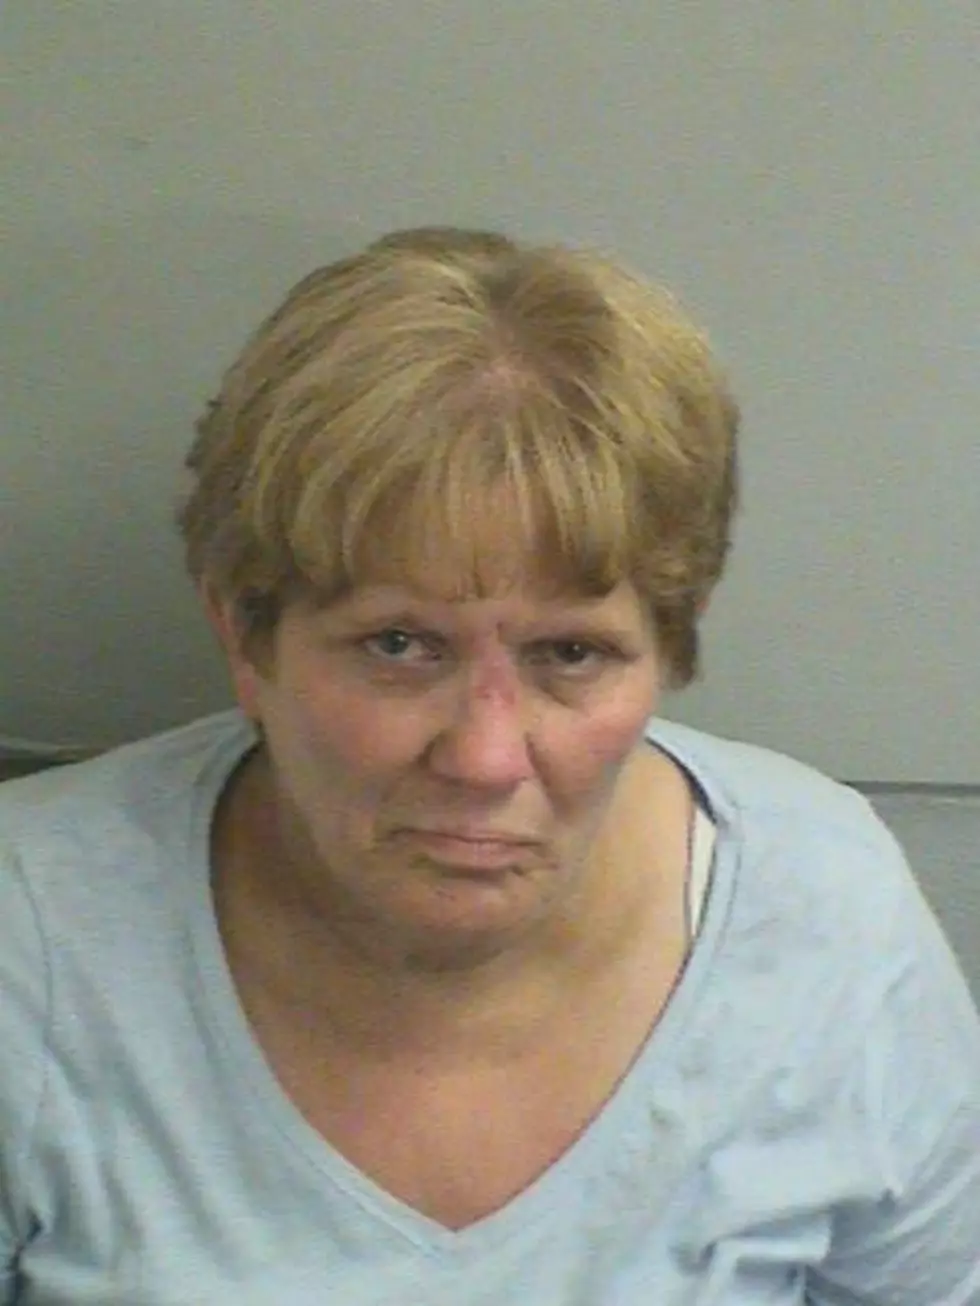 Bus driver charged with DWI after crash at OCVTS in Toms River